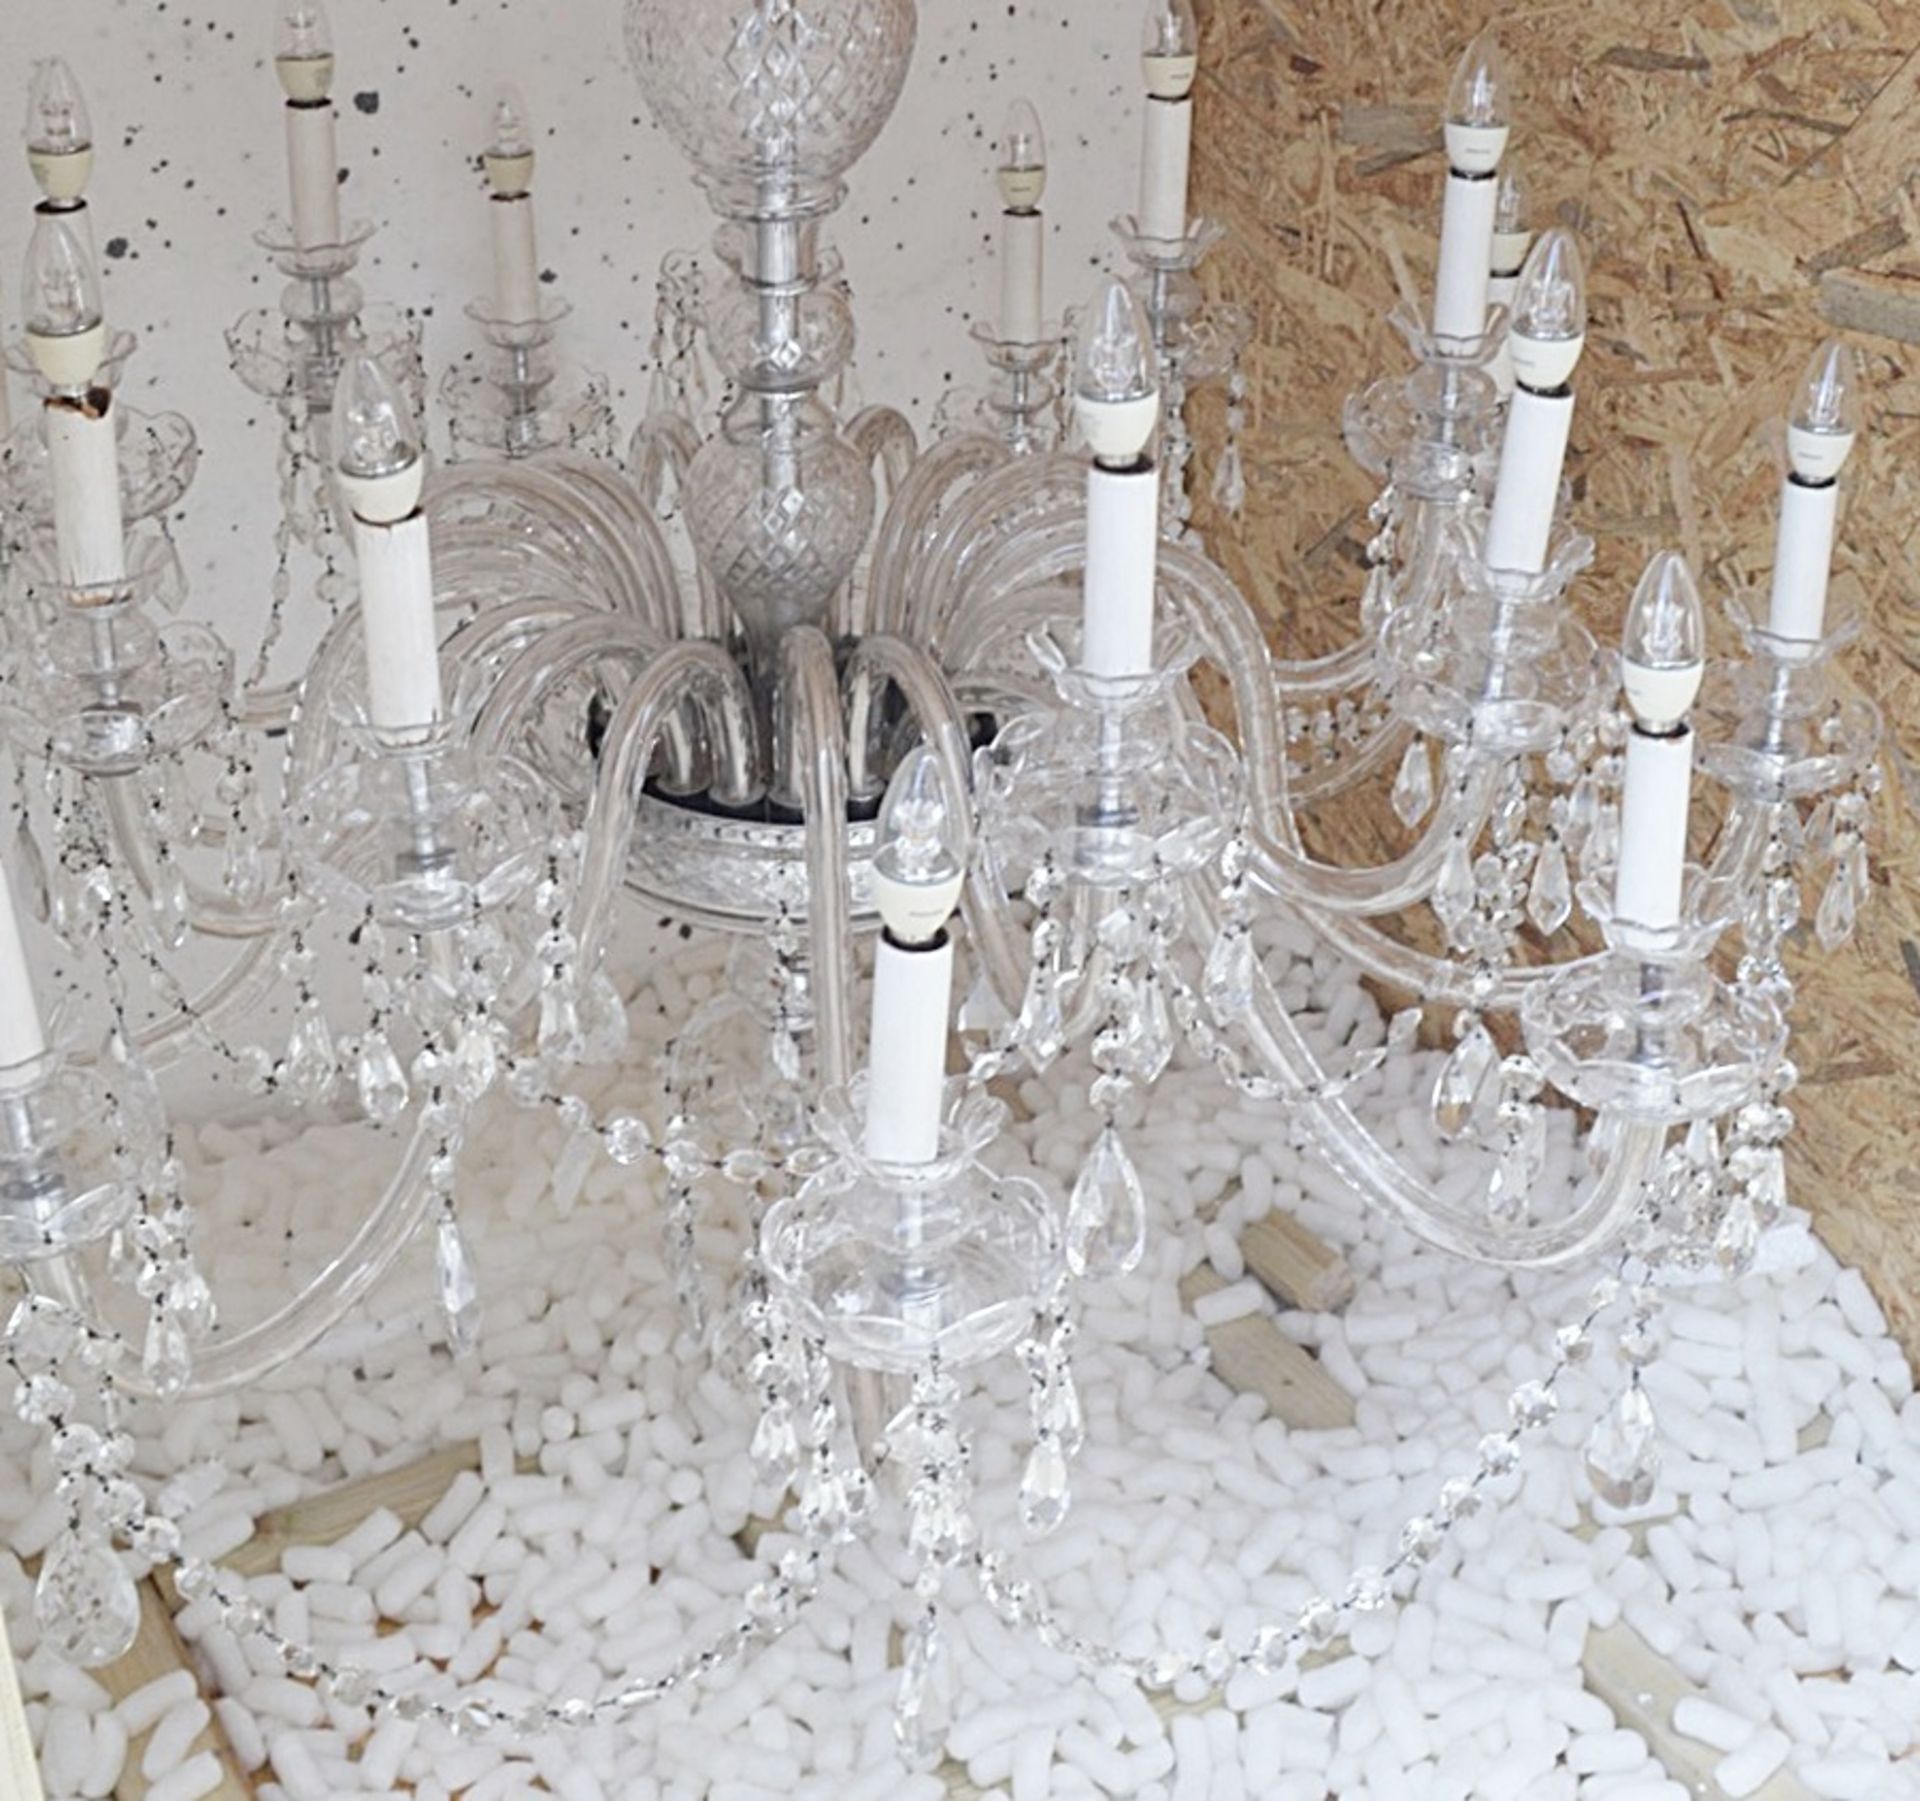 1 x Huge Commercial Ornate Georgian-Style Glass Chandelier - Dimensions: Height 150 x Diameter 125cm - Image 3 of 8